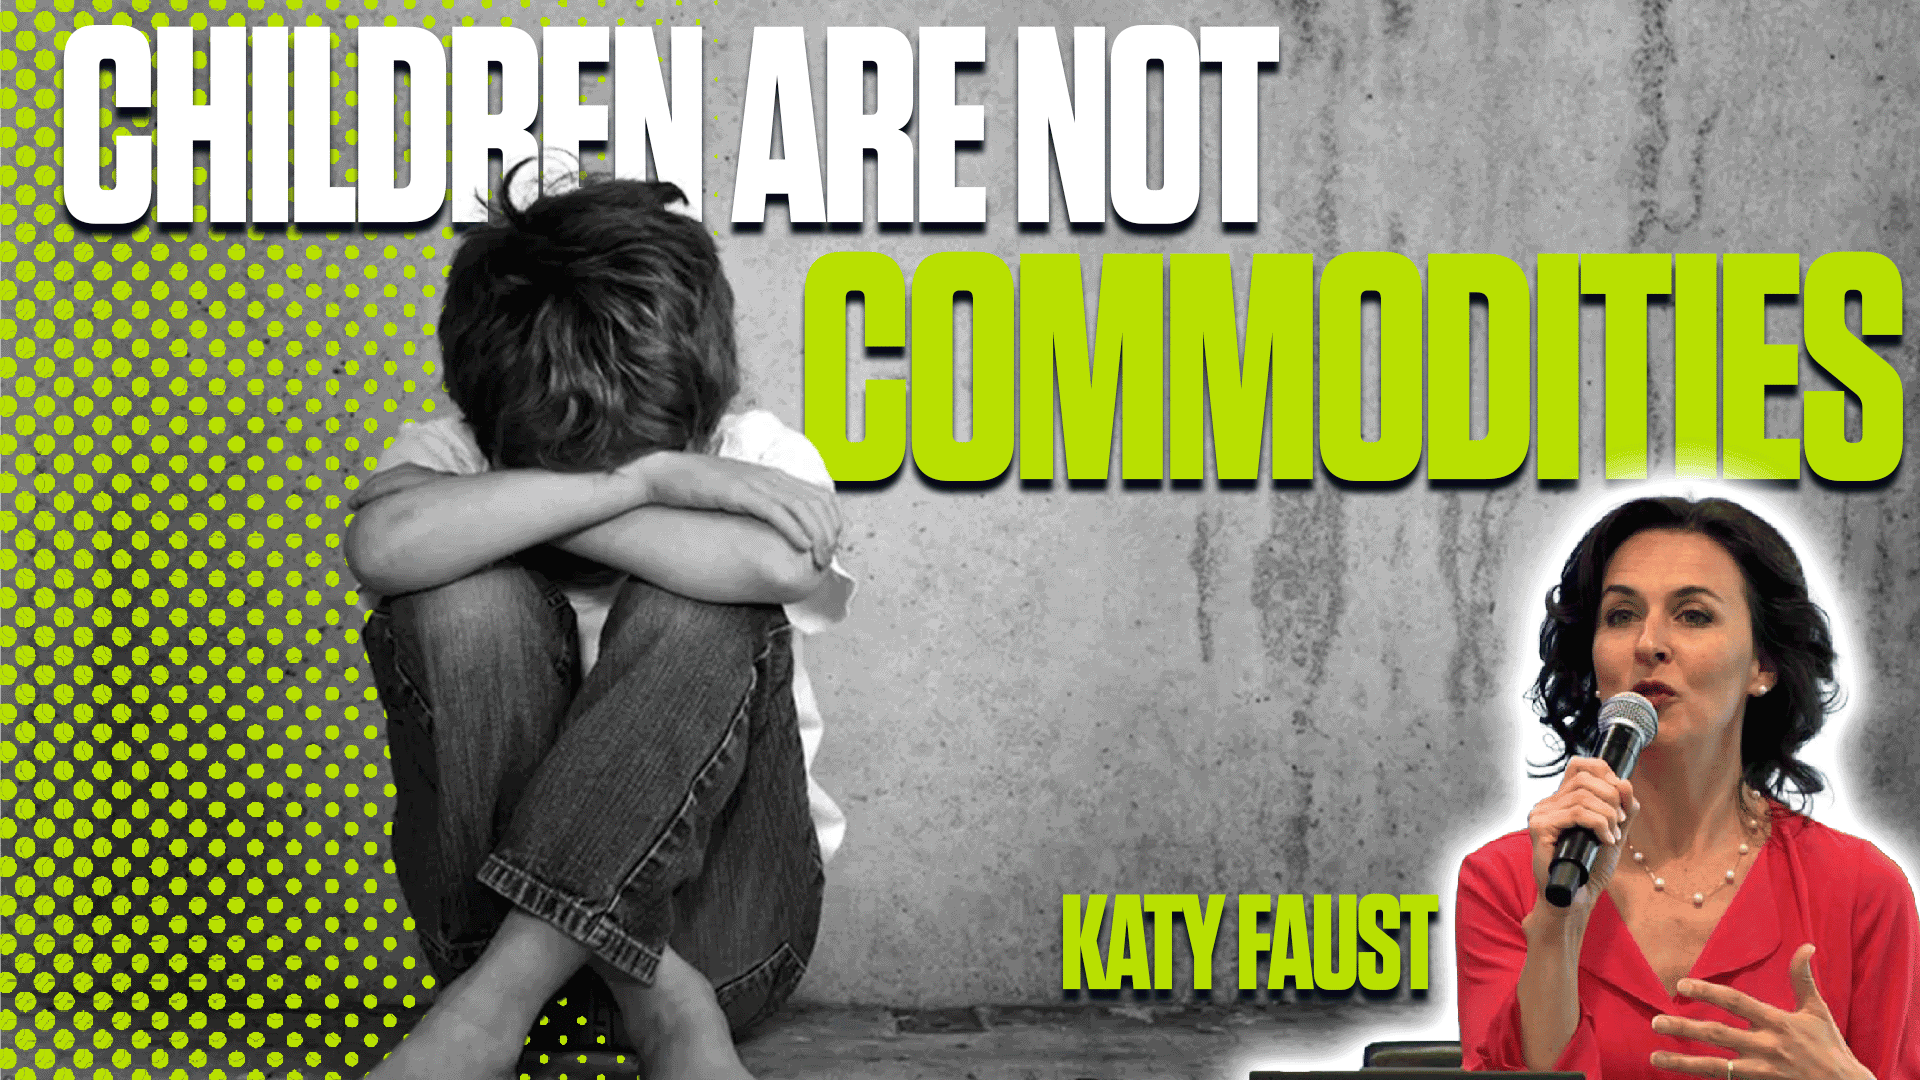 IVF and the Commodification of Children – Katy Faust